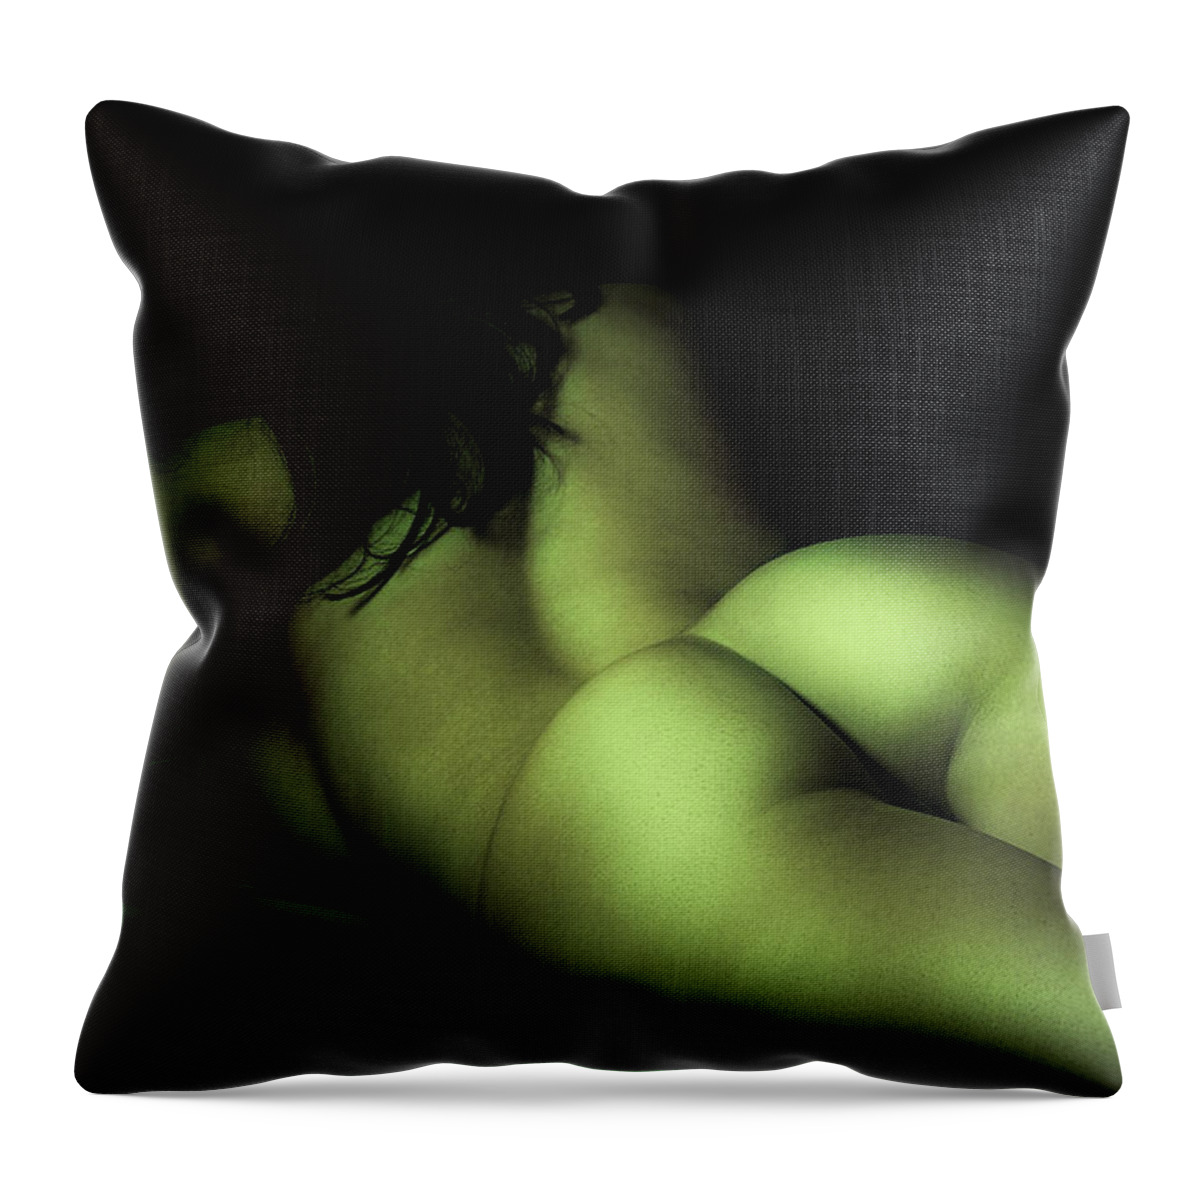 Naked Throw Pillow featuring the photograph Naked by David Naman